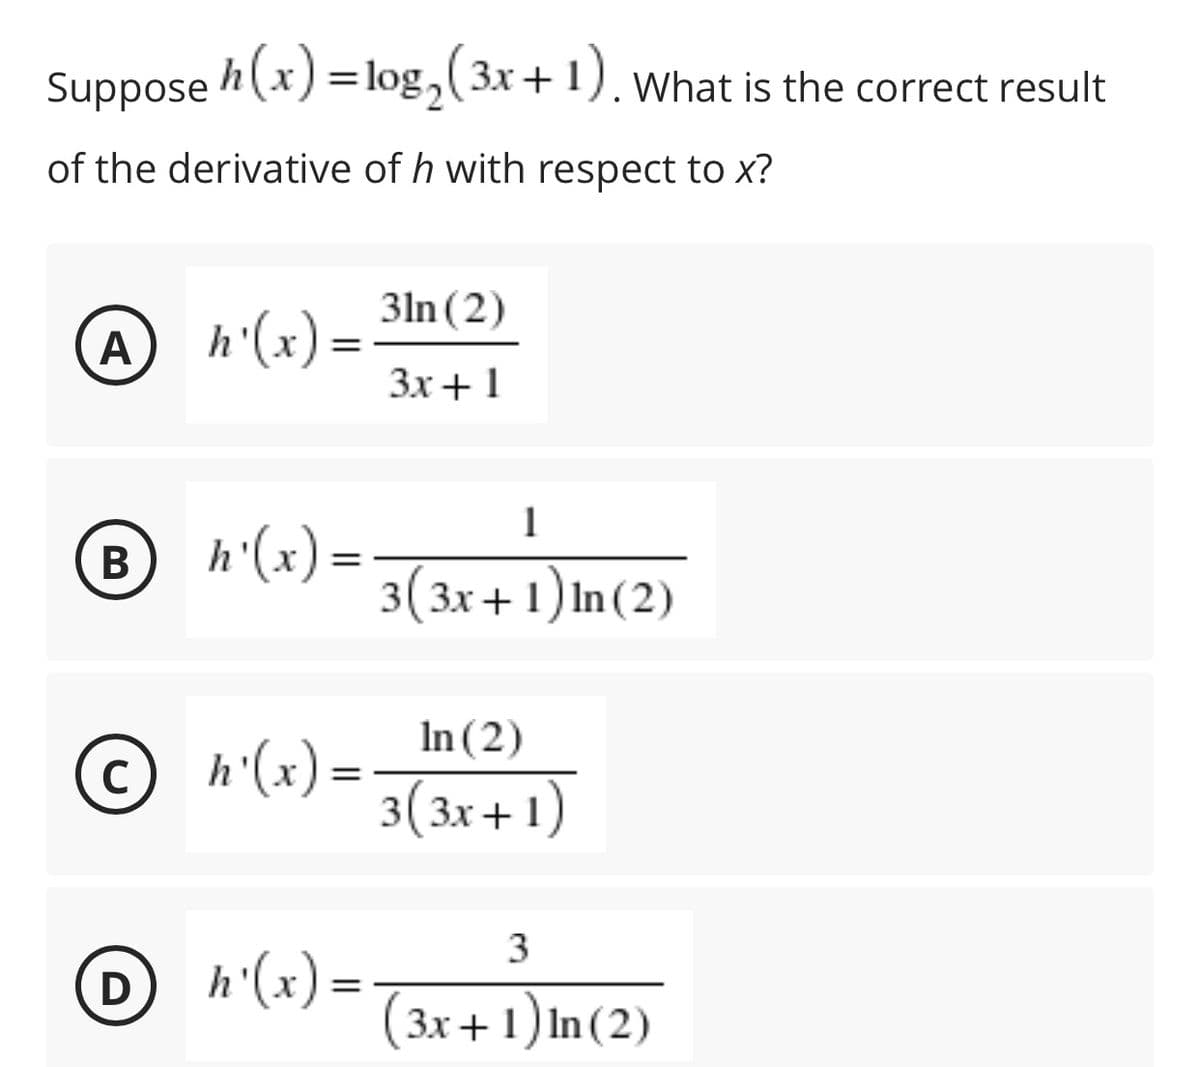 Suppose
h(x) =log,(3x+1),
What is the correct result
of the derivative of h with respect to x?
3ln (2)
h'(x) =
Зх + 1
A
1
h'(x)=-
3(3x+1) In(2)
В
In (2)
© h'(x)=-
3(3x+ 1)
%3D
h'(x) =-
(3x + 1) In(2)
